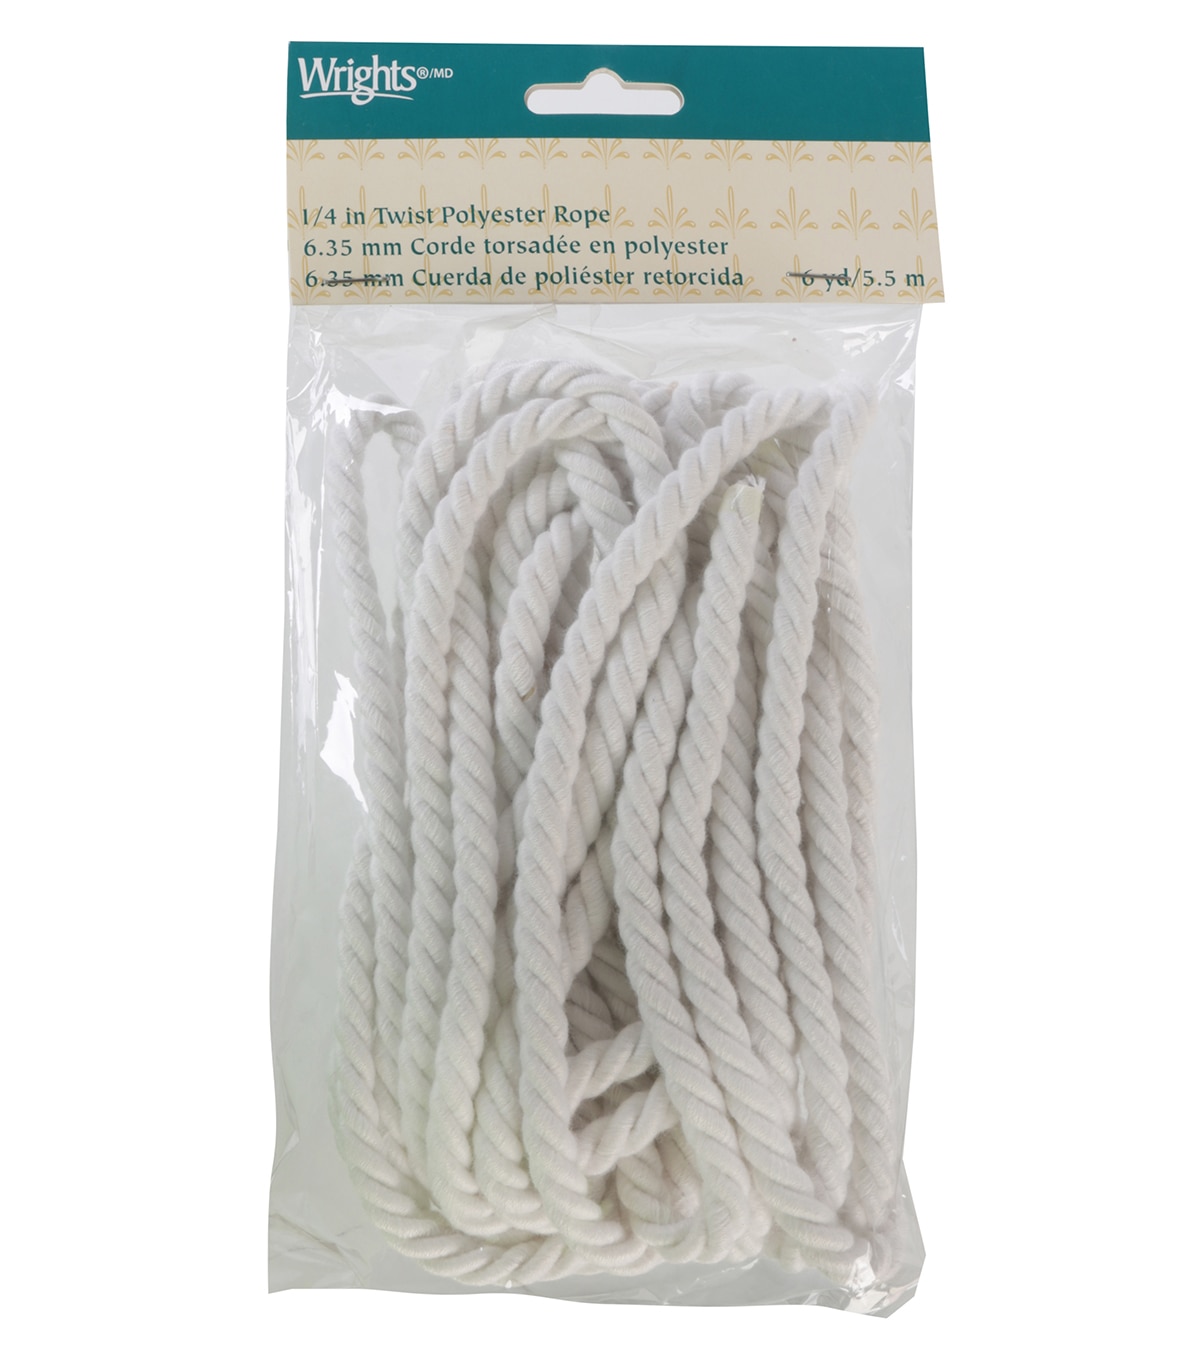 Wrights 3/16 Twist Jute Rope 6 yds Natural - Upholstery Notions - Sewing Supplies - JOANN Fabric and Craft Stores